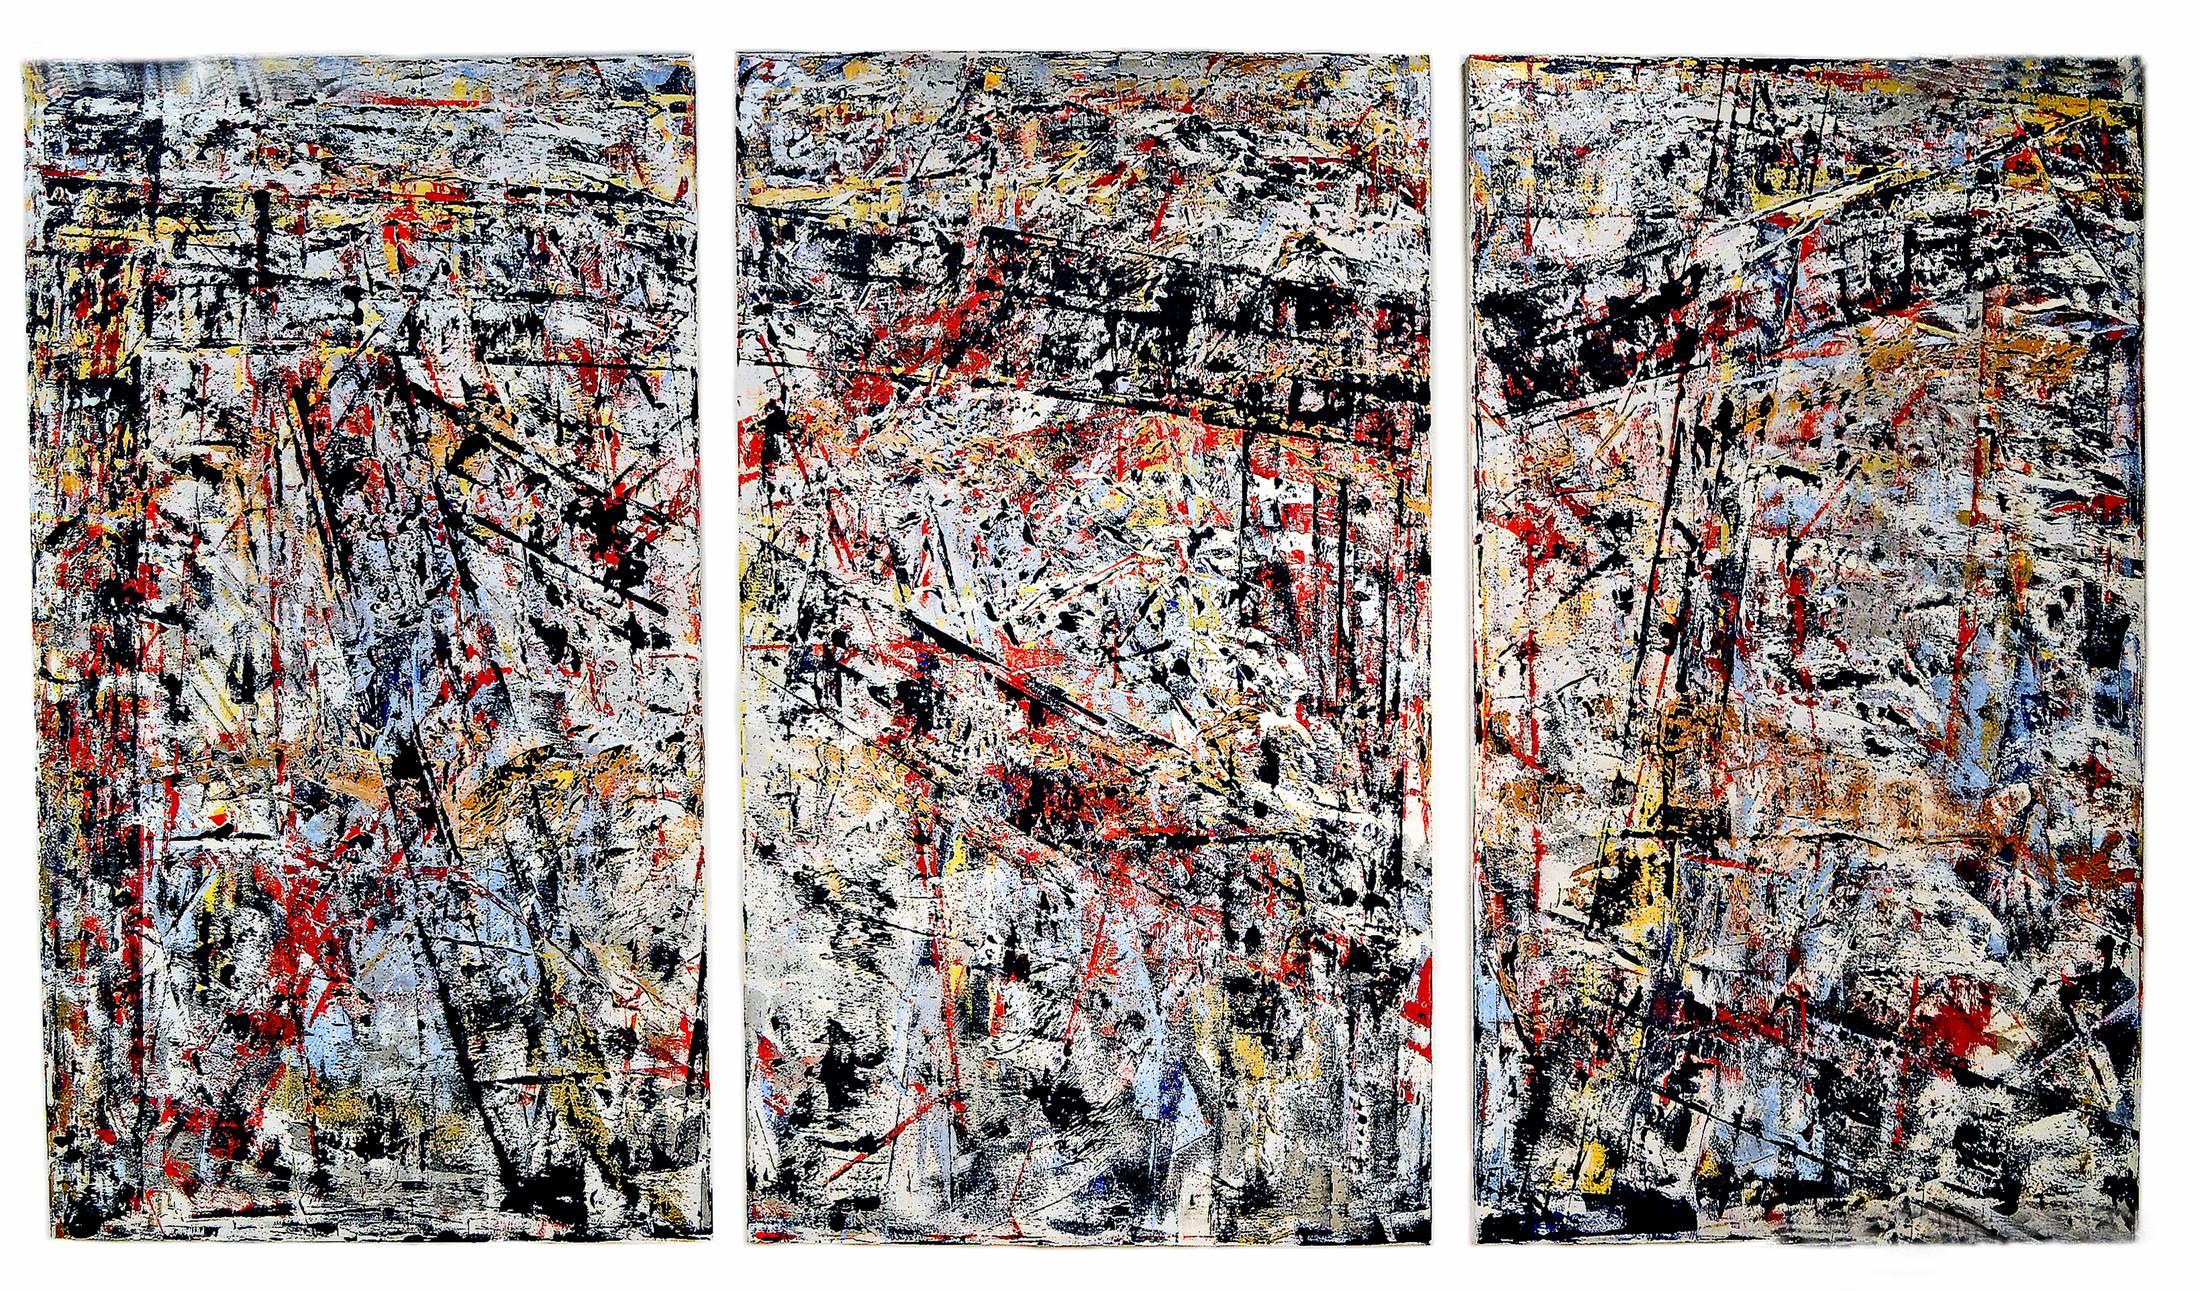 Abstract Expressionist artist Aaron Finkbiner has always been inspired by architecture, landscapes and nature. This large abstract triptych is titled Seen and Unseen. It is exceptionally layered in varying brushstrokes and paint application with a